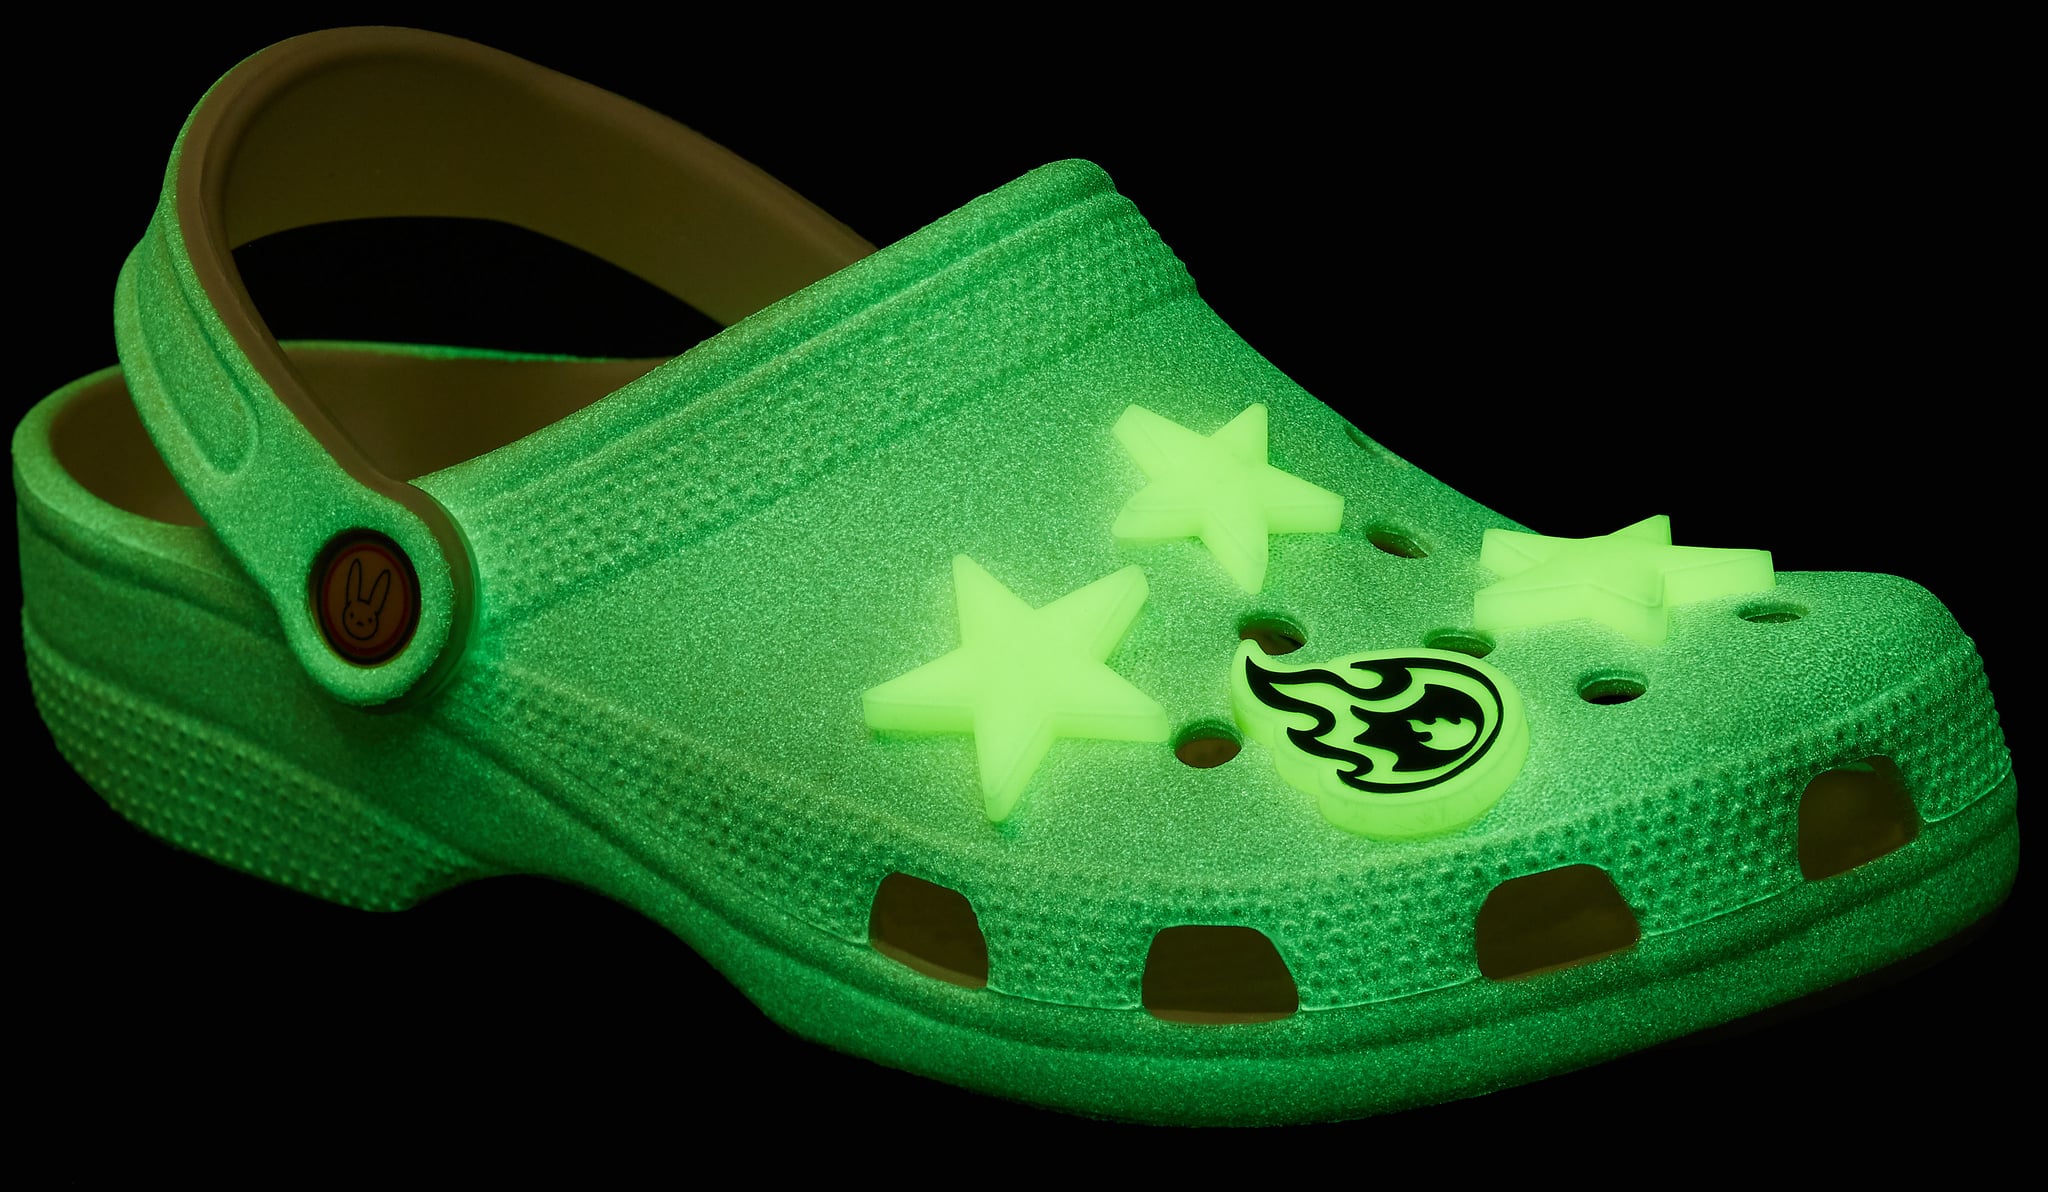 how much do the bad bunny crocs cost